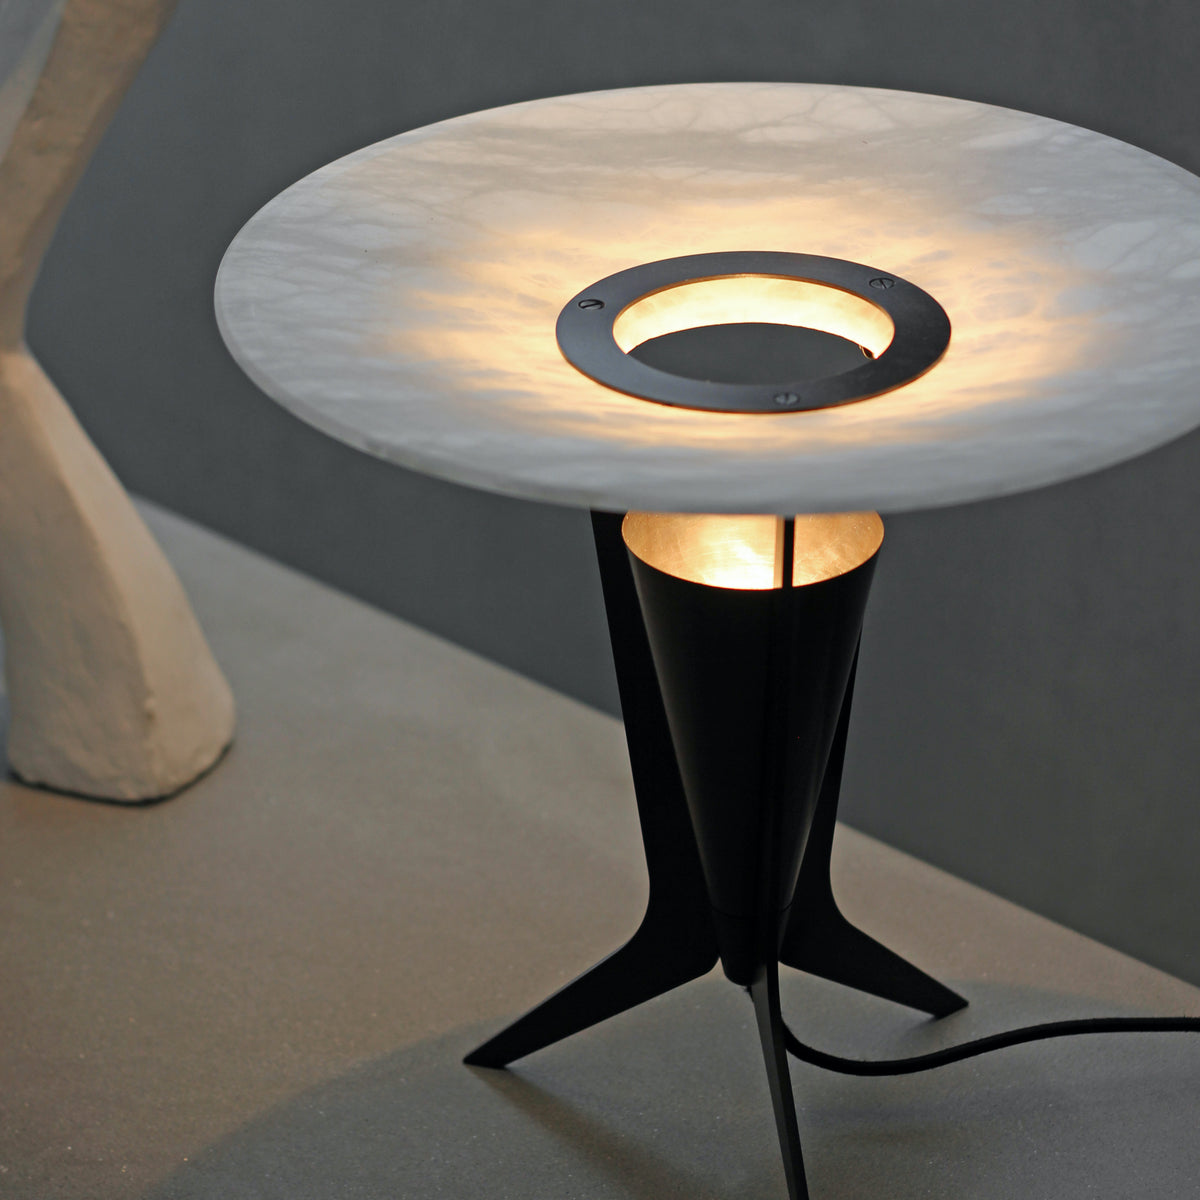 J Adams Aragon Table Light in bronze with alabaster stone